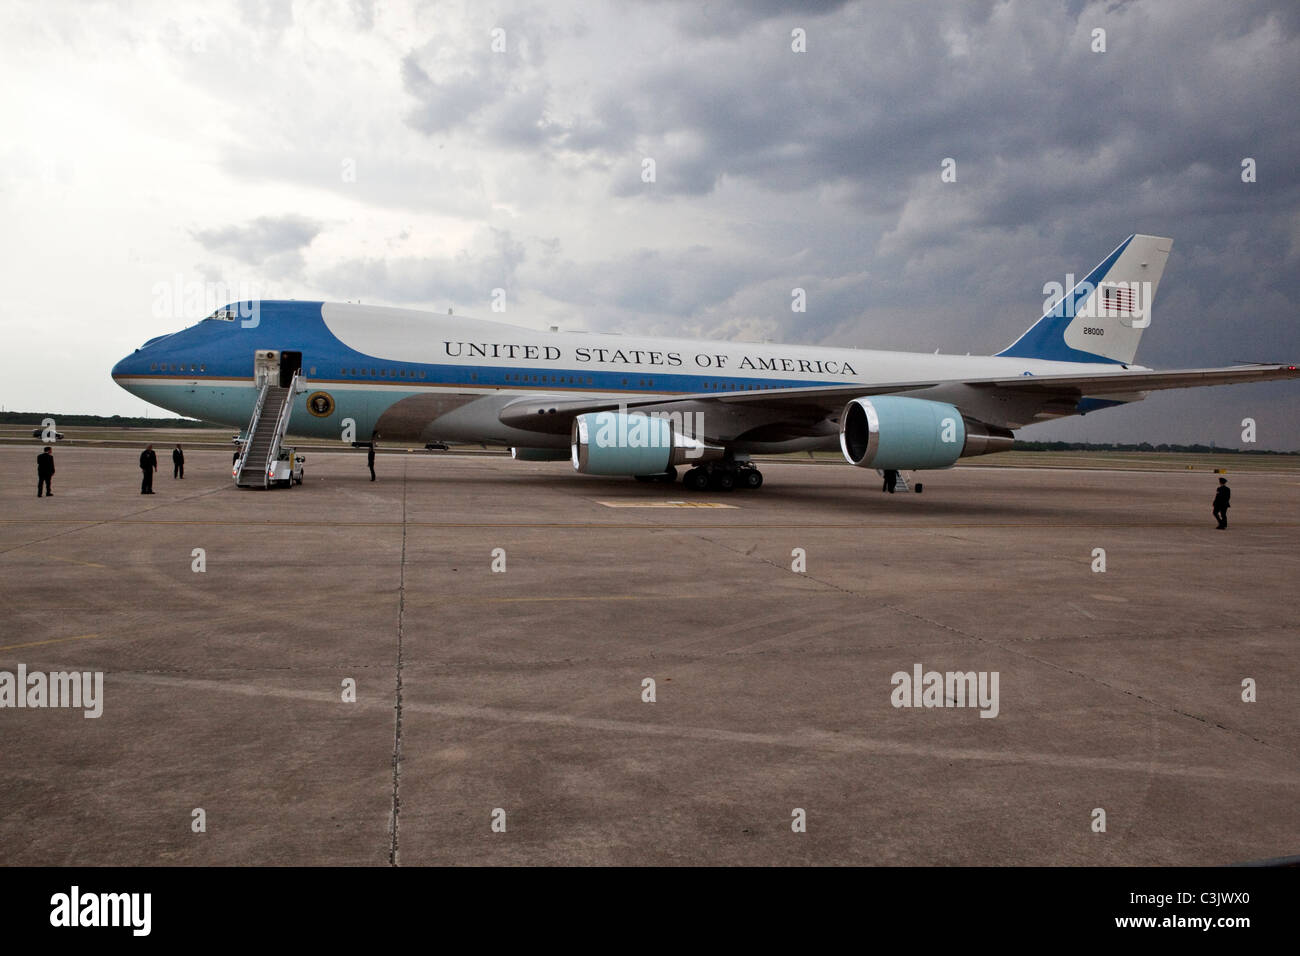 Air Force One, the . Air Force jet carrying the President of the United  States, lands in Austin Texas USA Stock Photo - Alamy